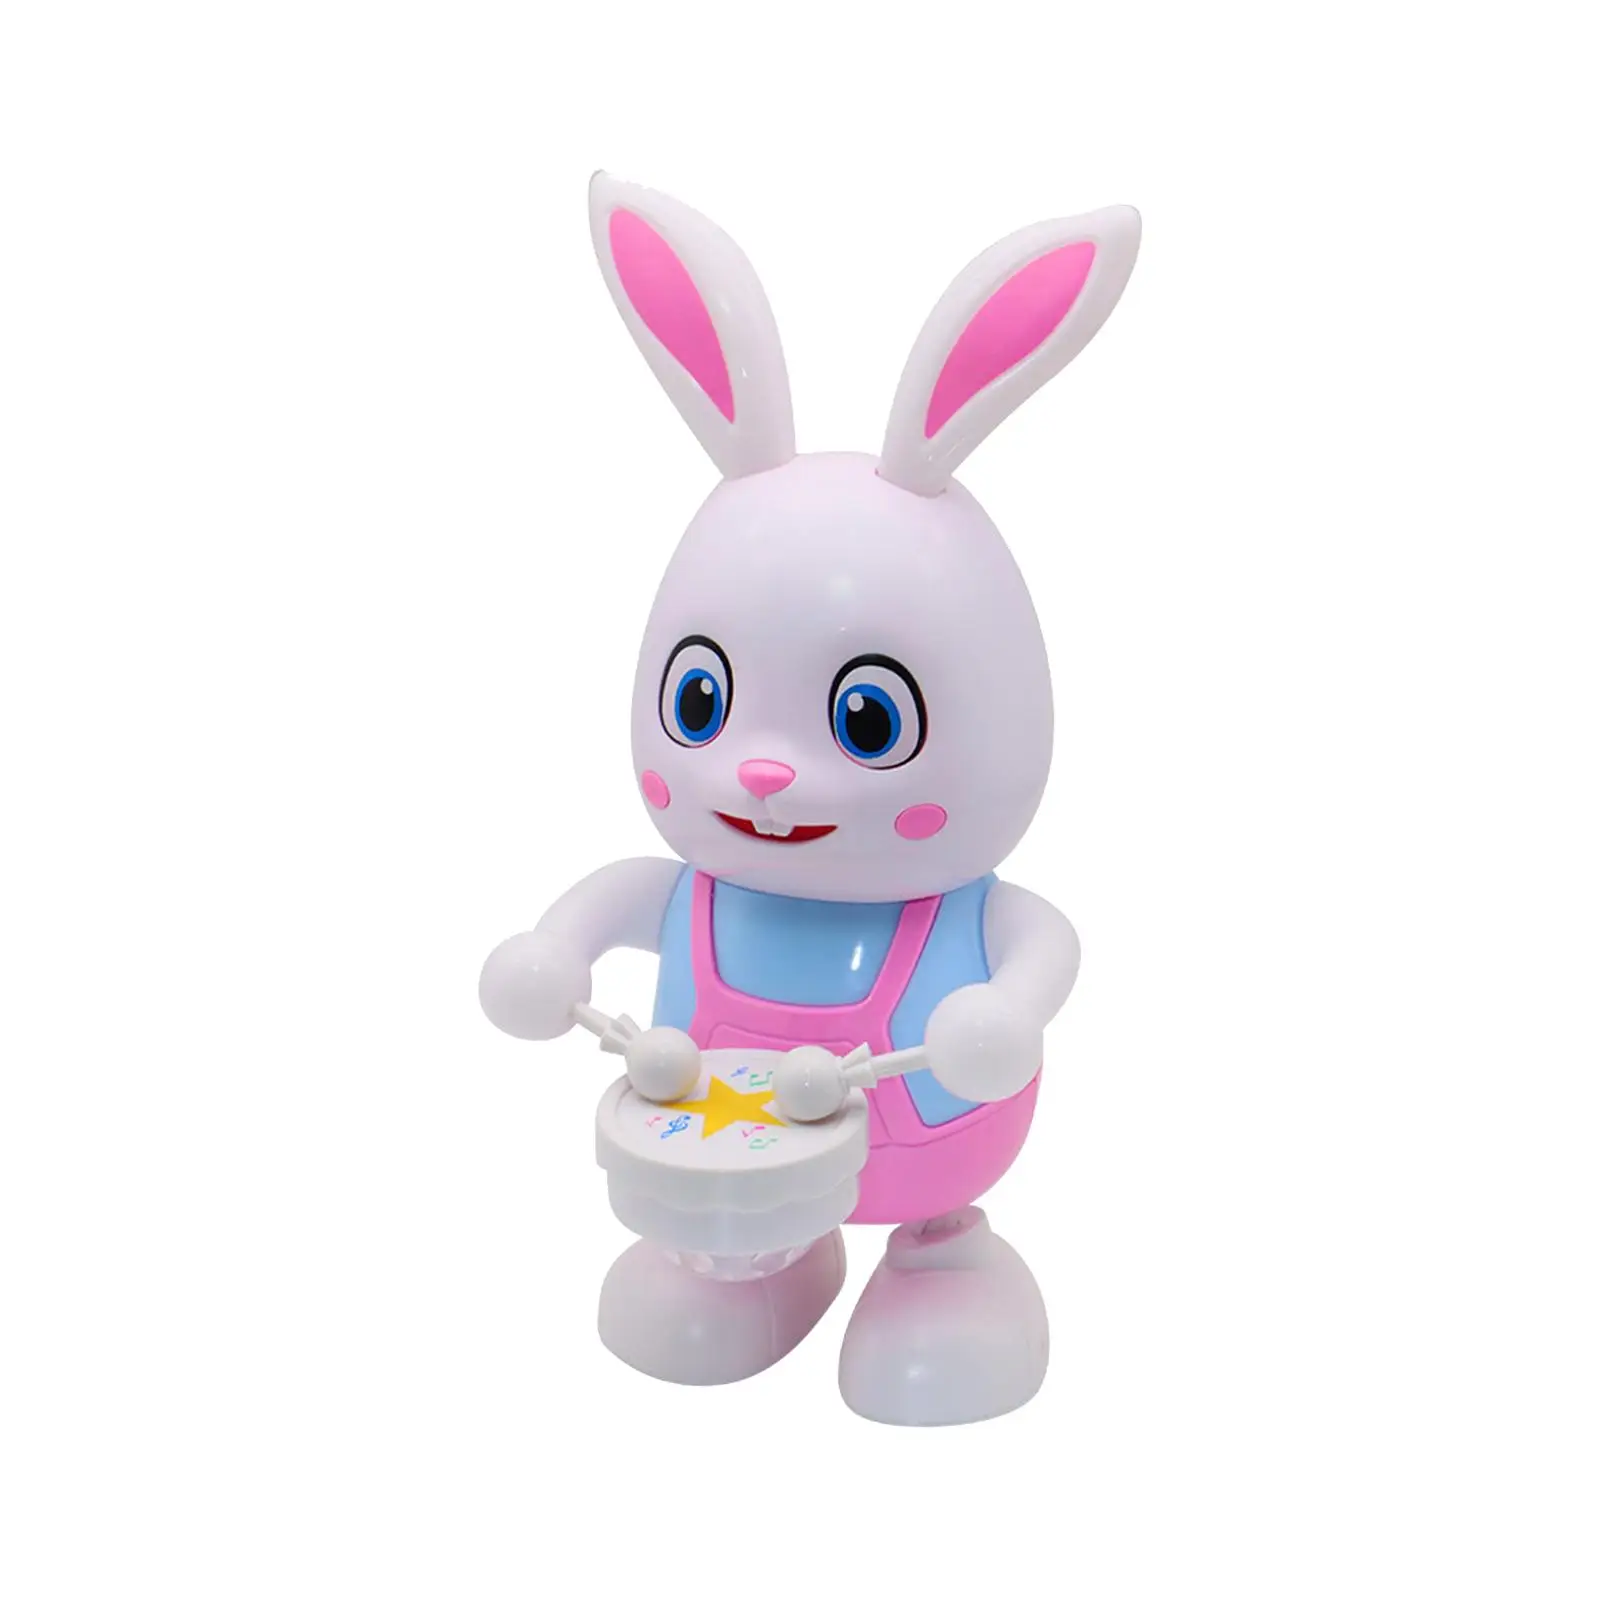 Baby Toy with Music and Lights Cute Dancing Toy for 3+ Year Old Babies Girls